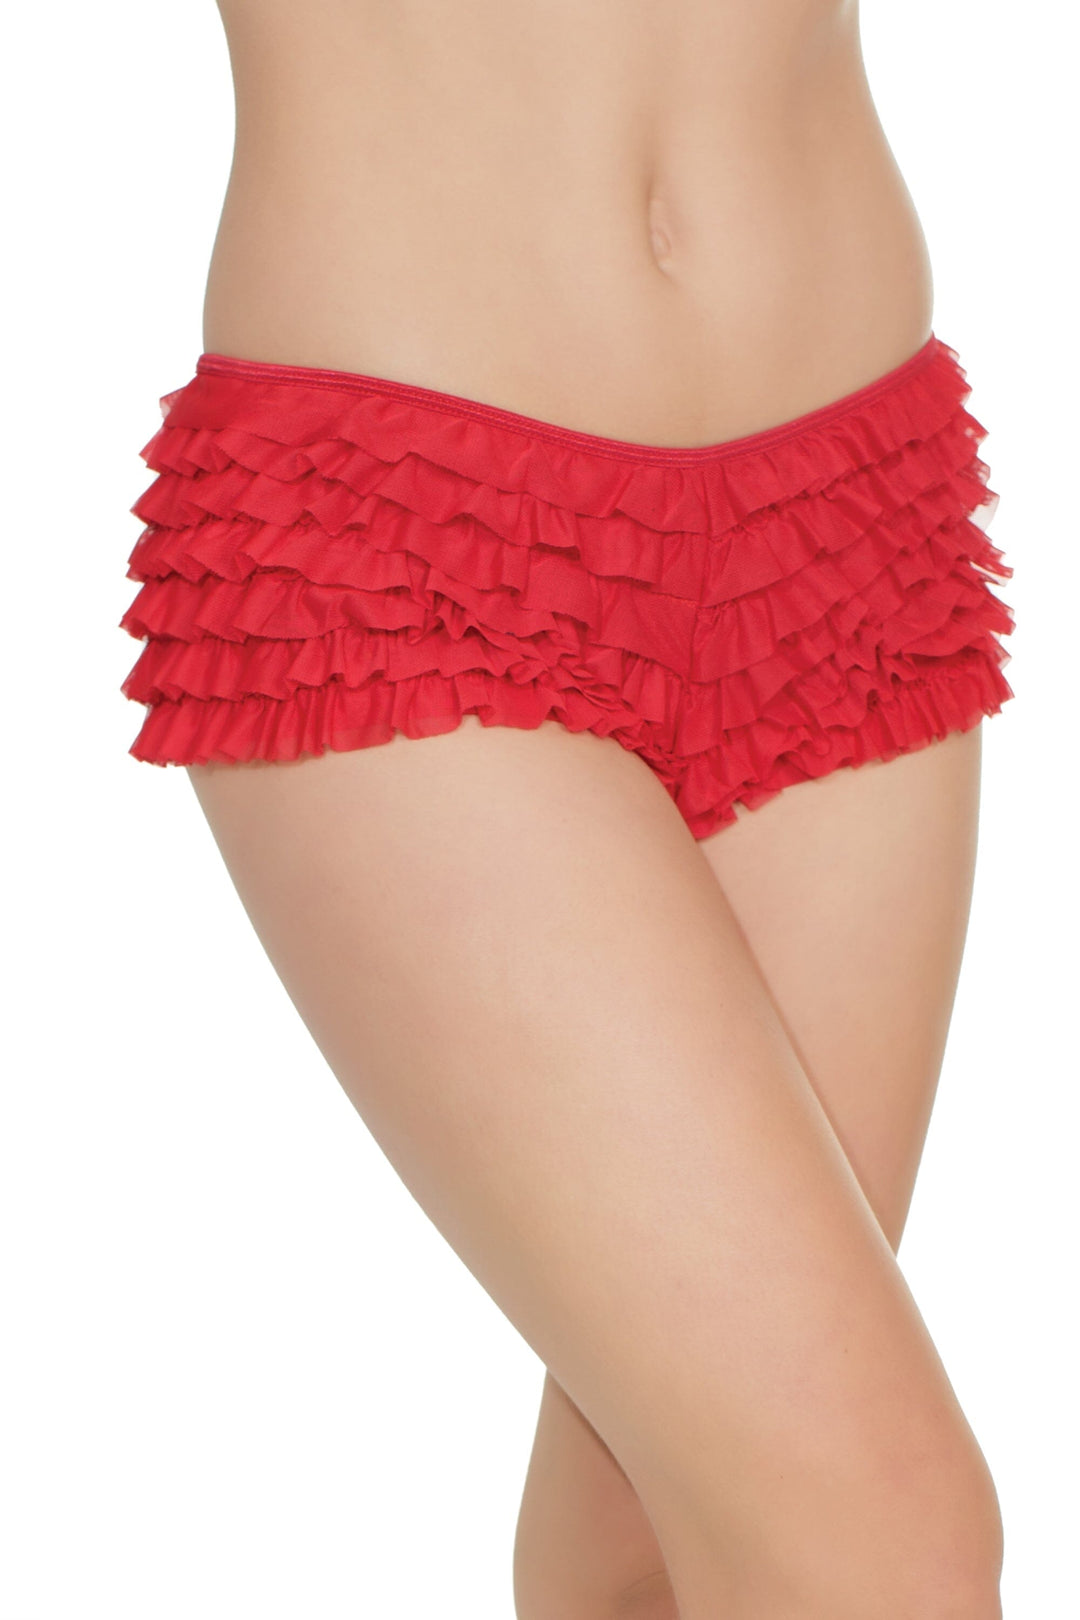 Red Ruffle Shorts-Booty Shorts-Coquette-Red-O/S-SEXYSHOES.COM